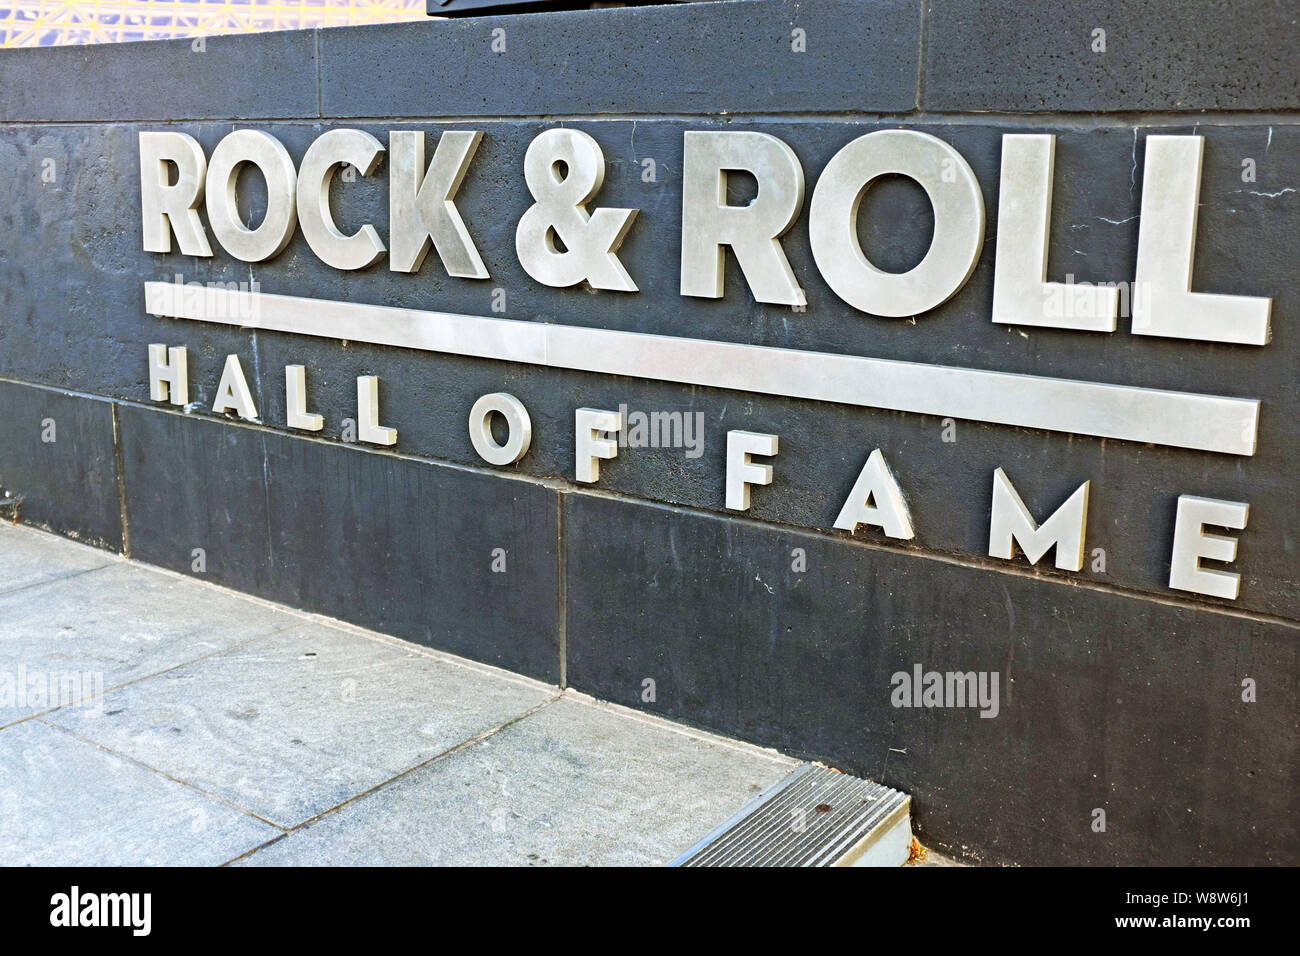 Rock and Roll Hall of Fame-Skript an der Wand aus Granit außerhalb der Rock and Roll Hall of Fame and Museum in Cleveland, Ohio, USA. Stockfoto